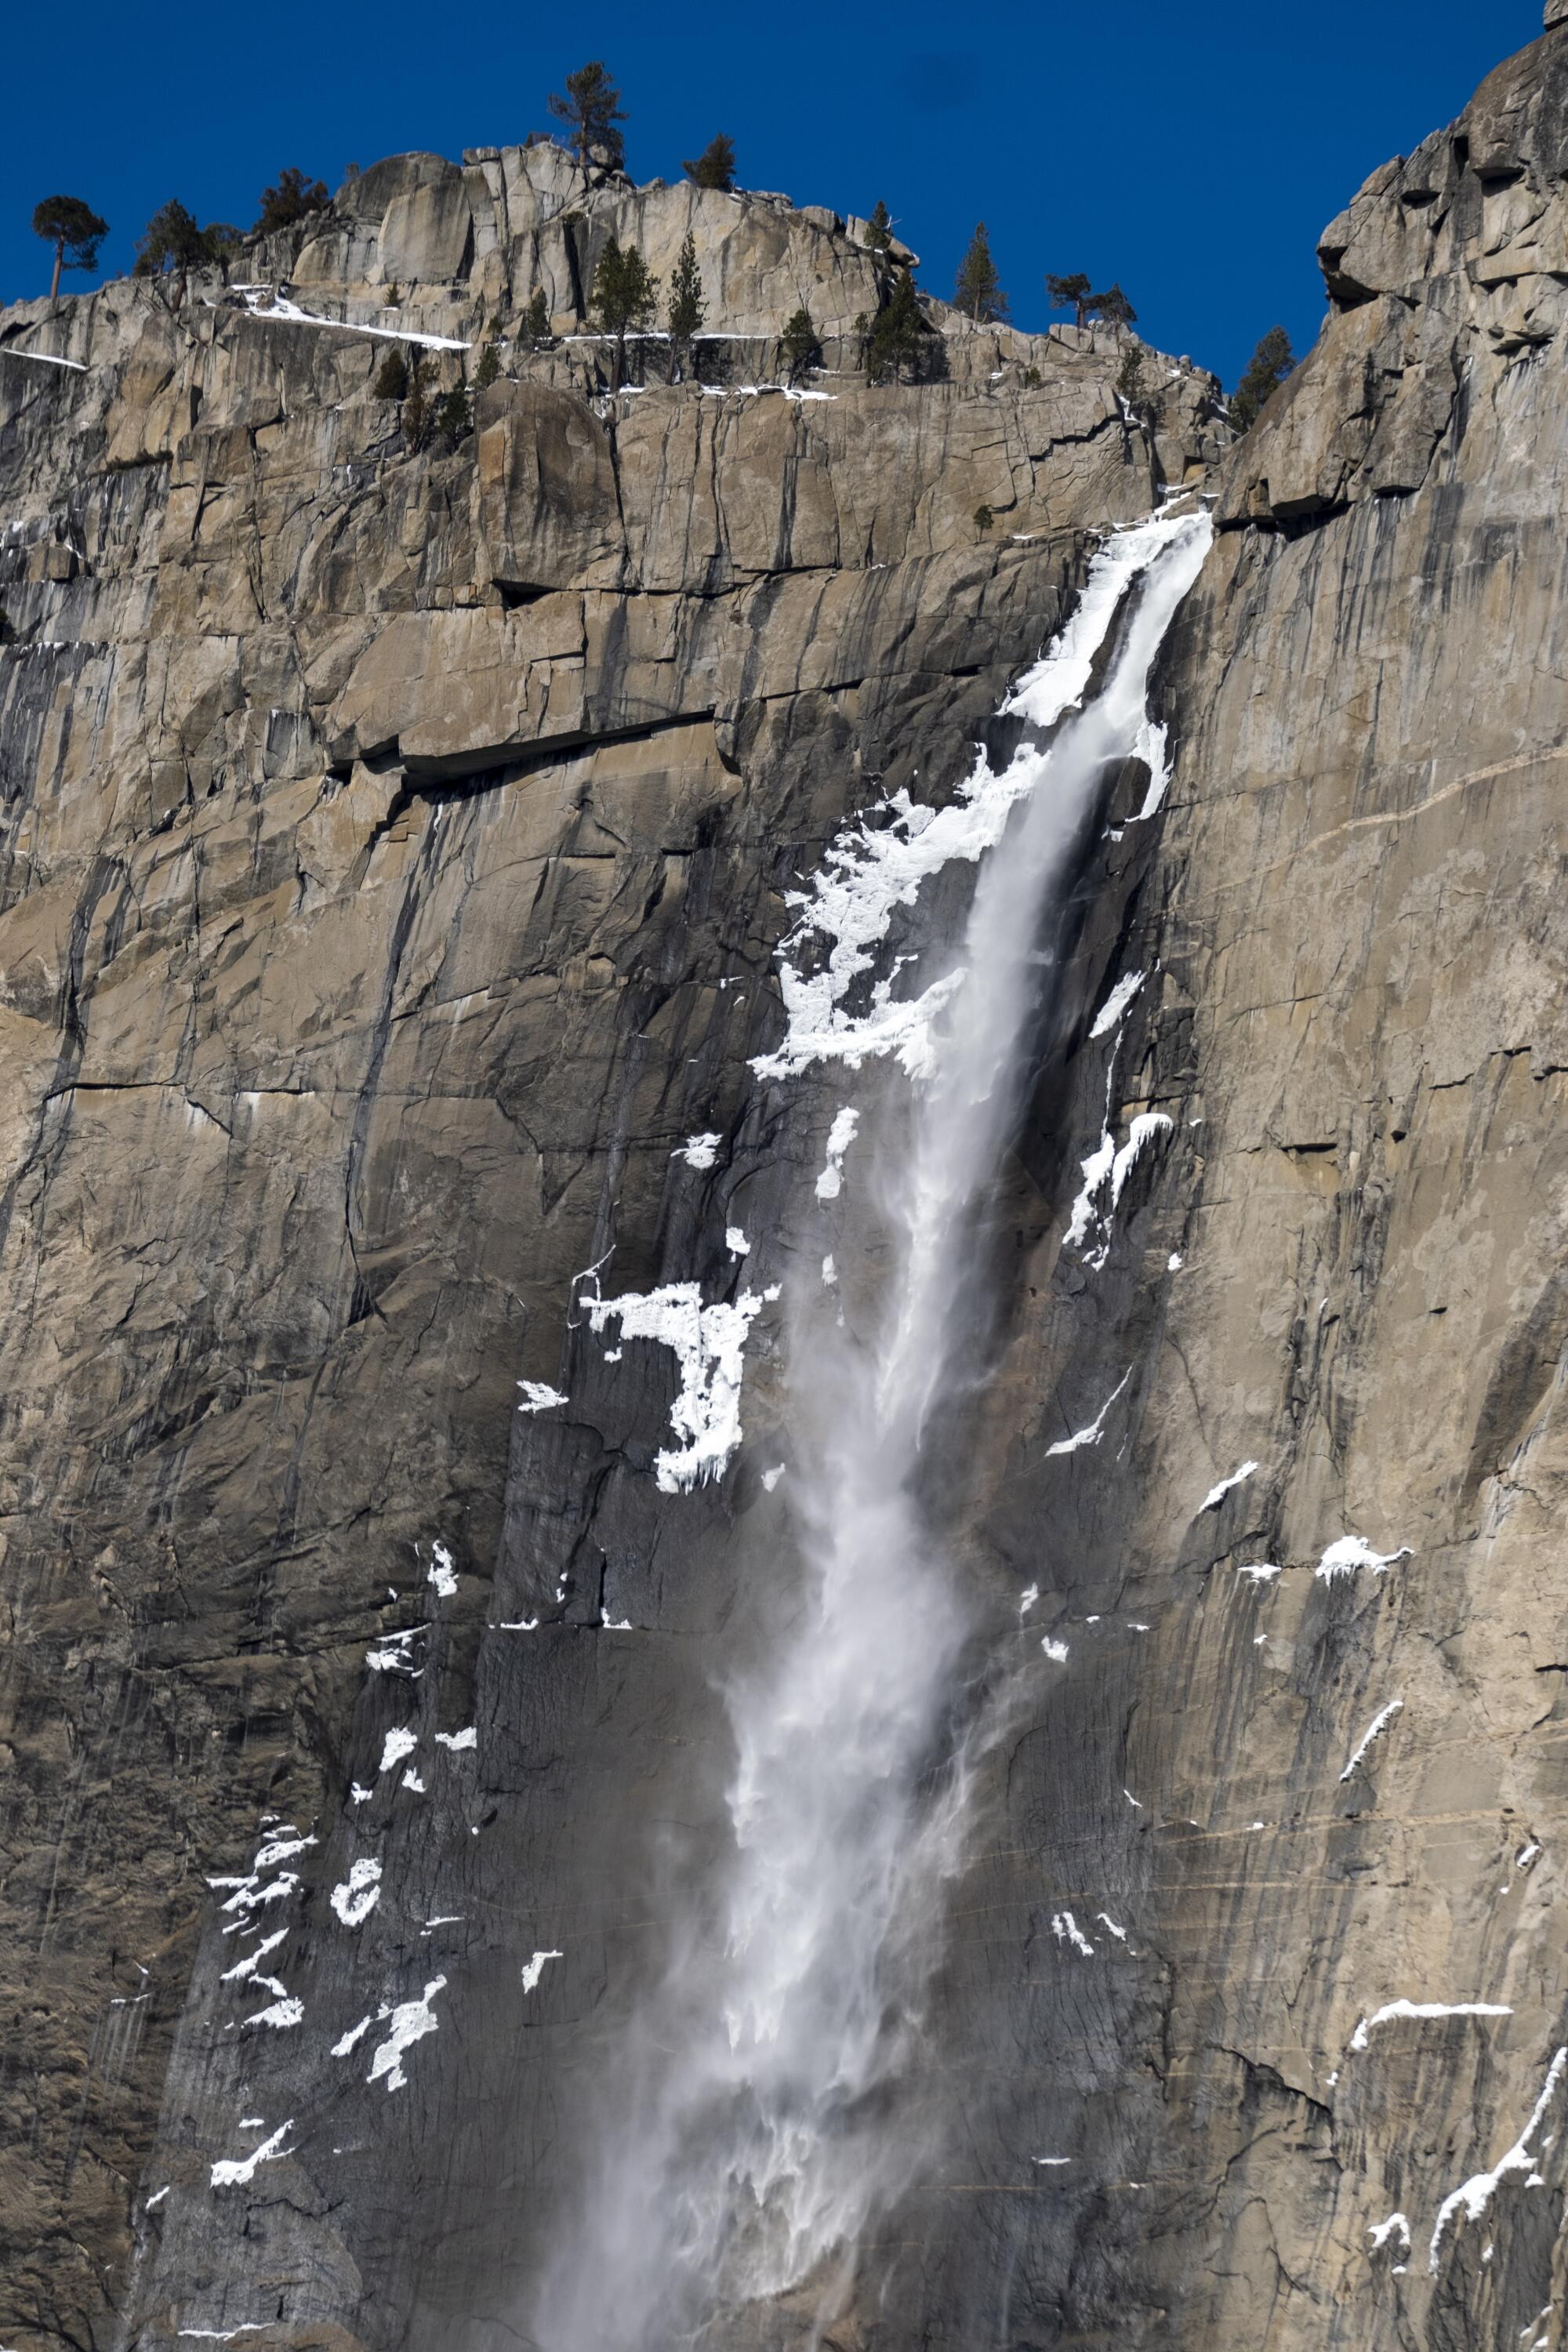 A waterfall plummets down a granite prominence marked by patches of snow and ice.